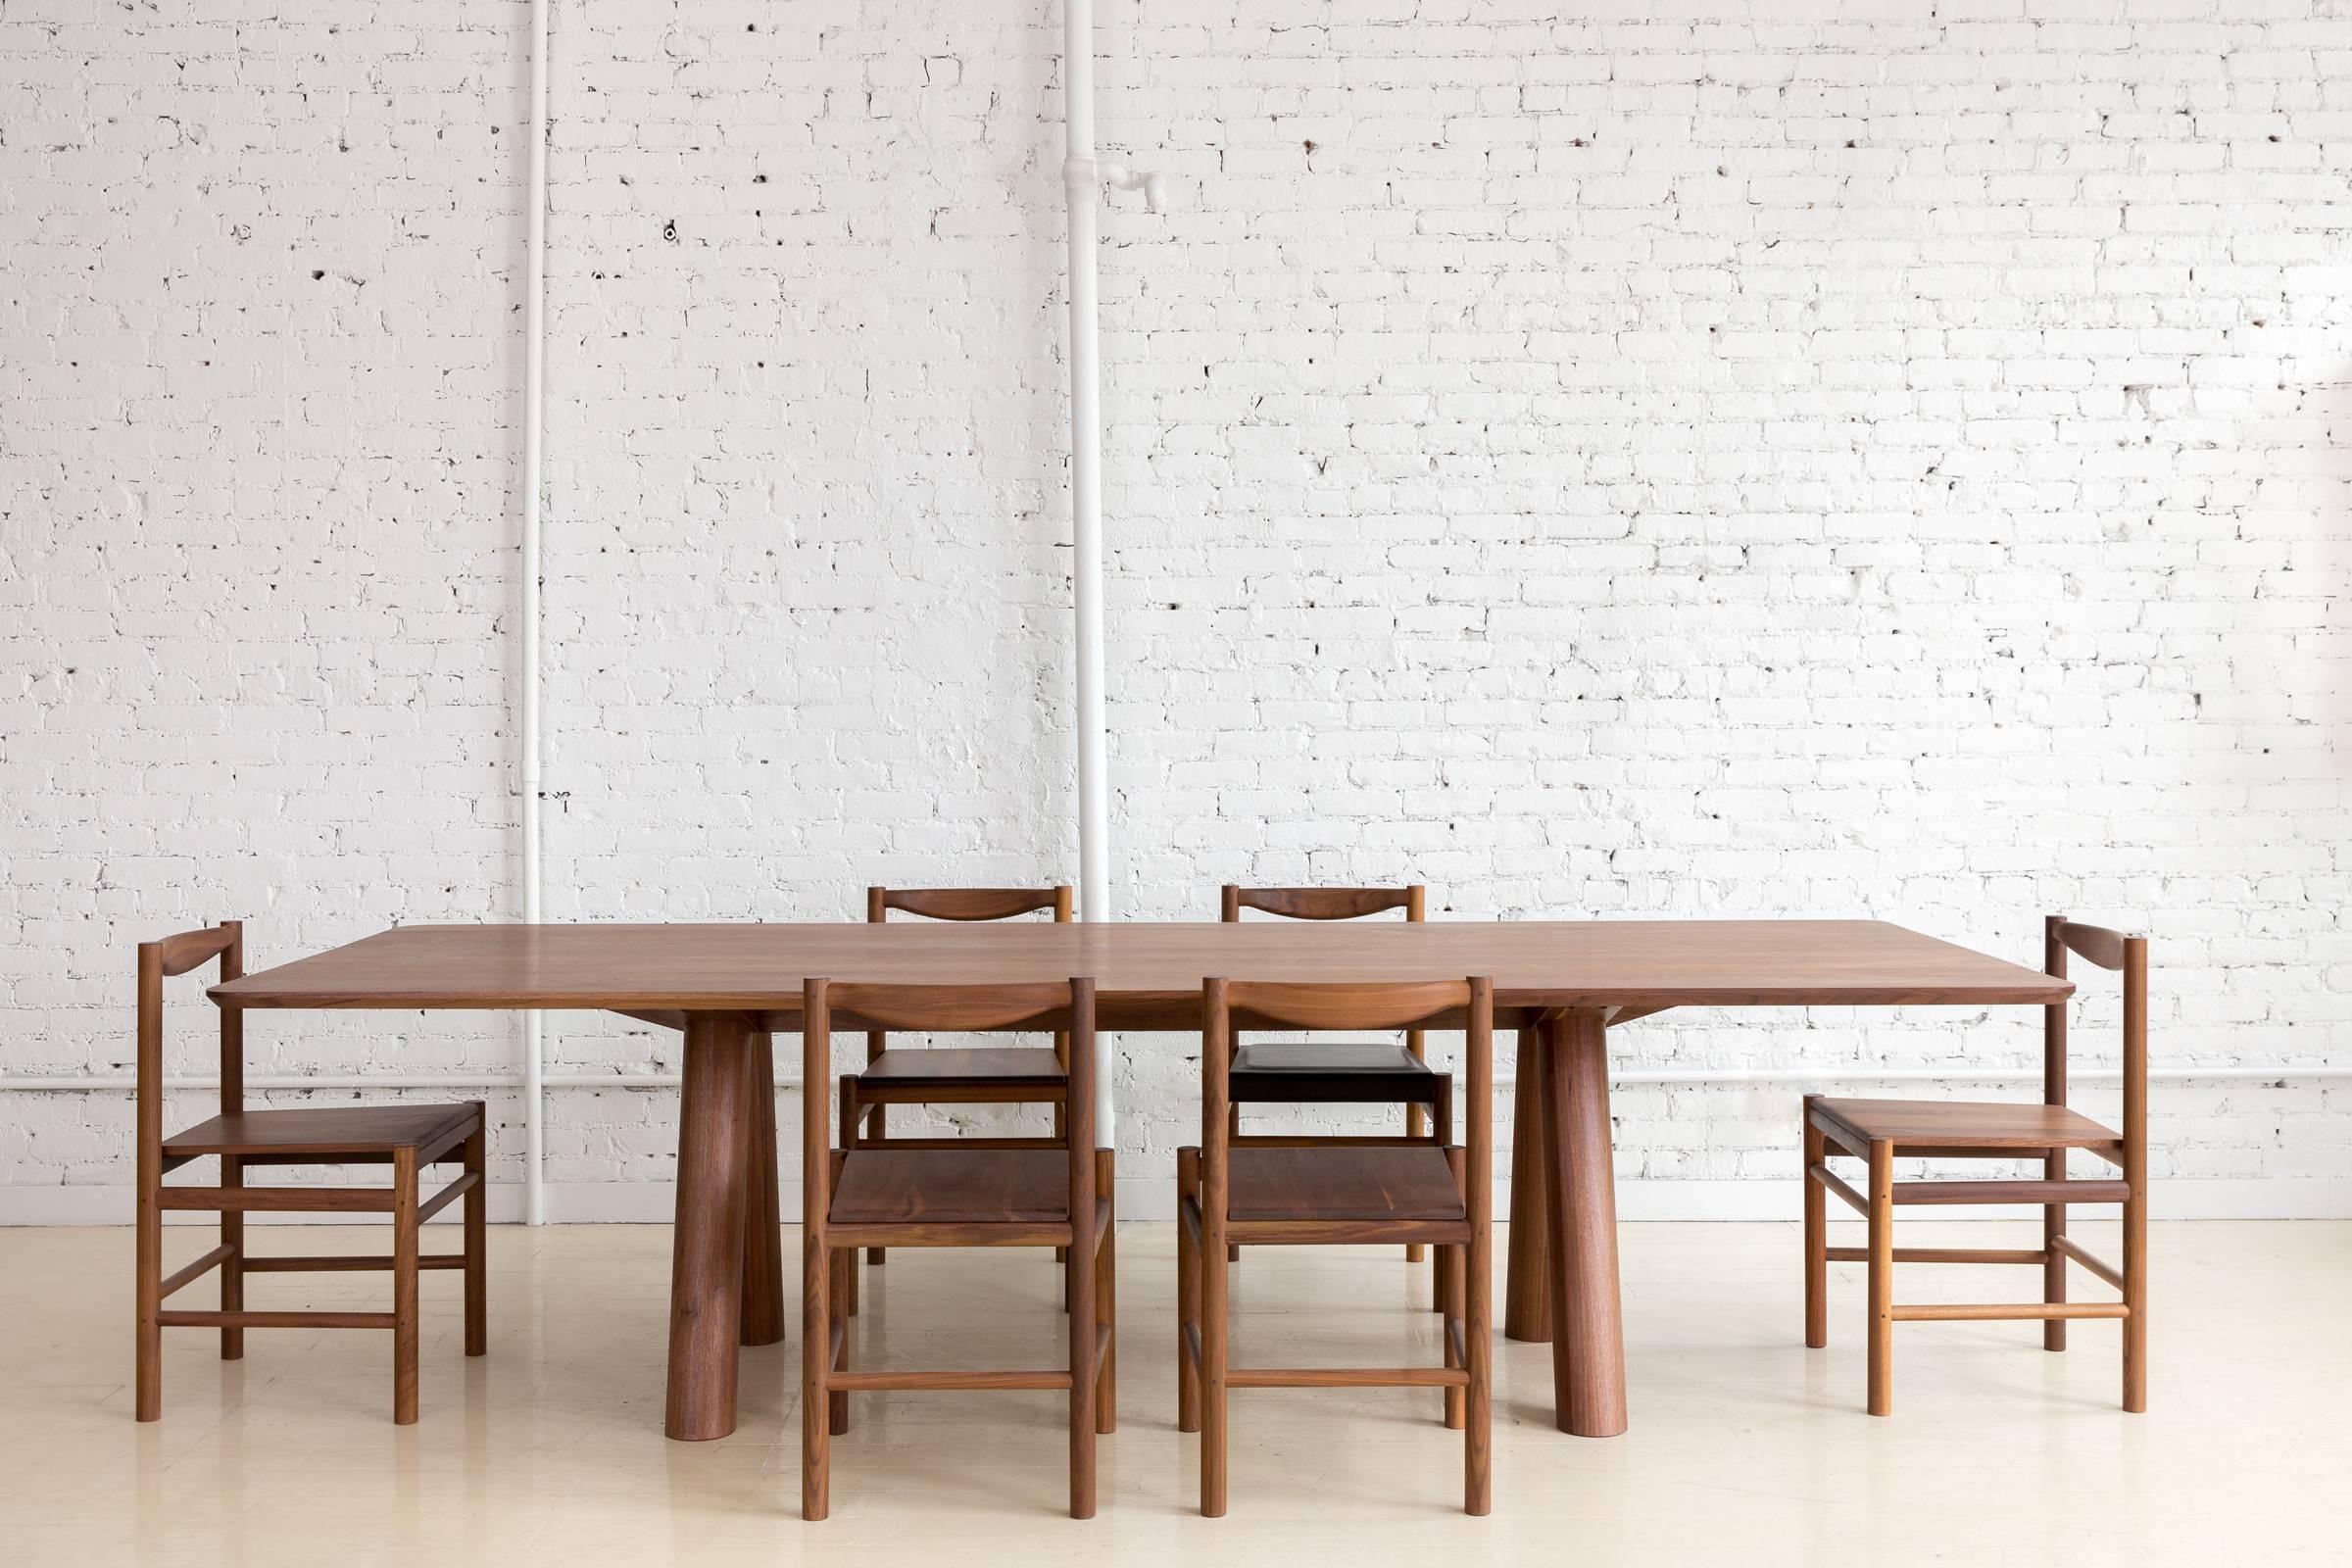 This contemporary, minimal dining table features large diameter legs and a bold trestle that give rise to an elegant hardwood top. Top includes rounded corners with an optional underside bevel to compliment details found on the base.

Made to